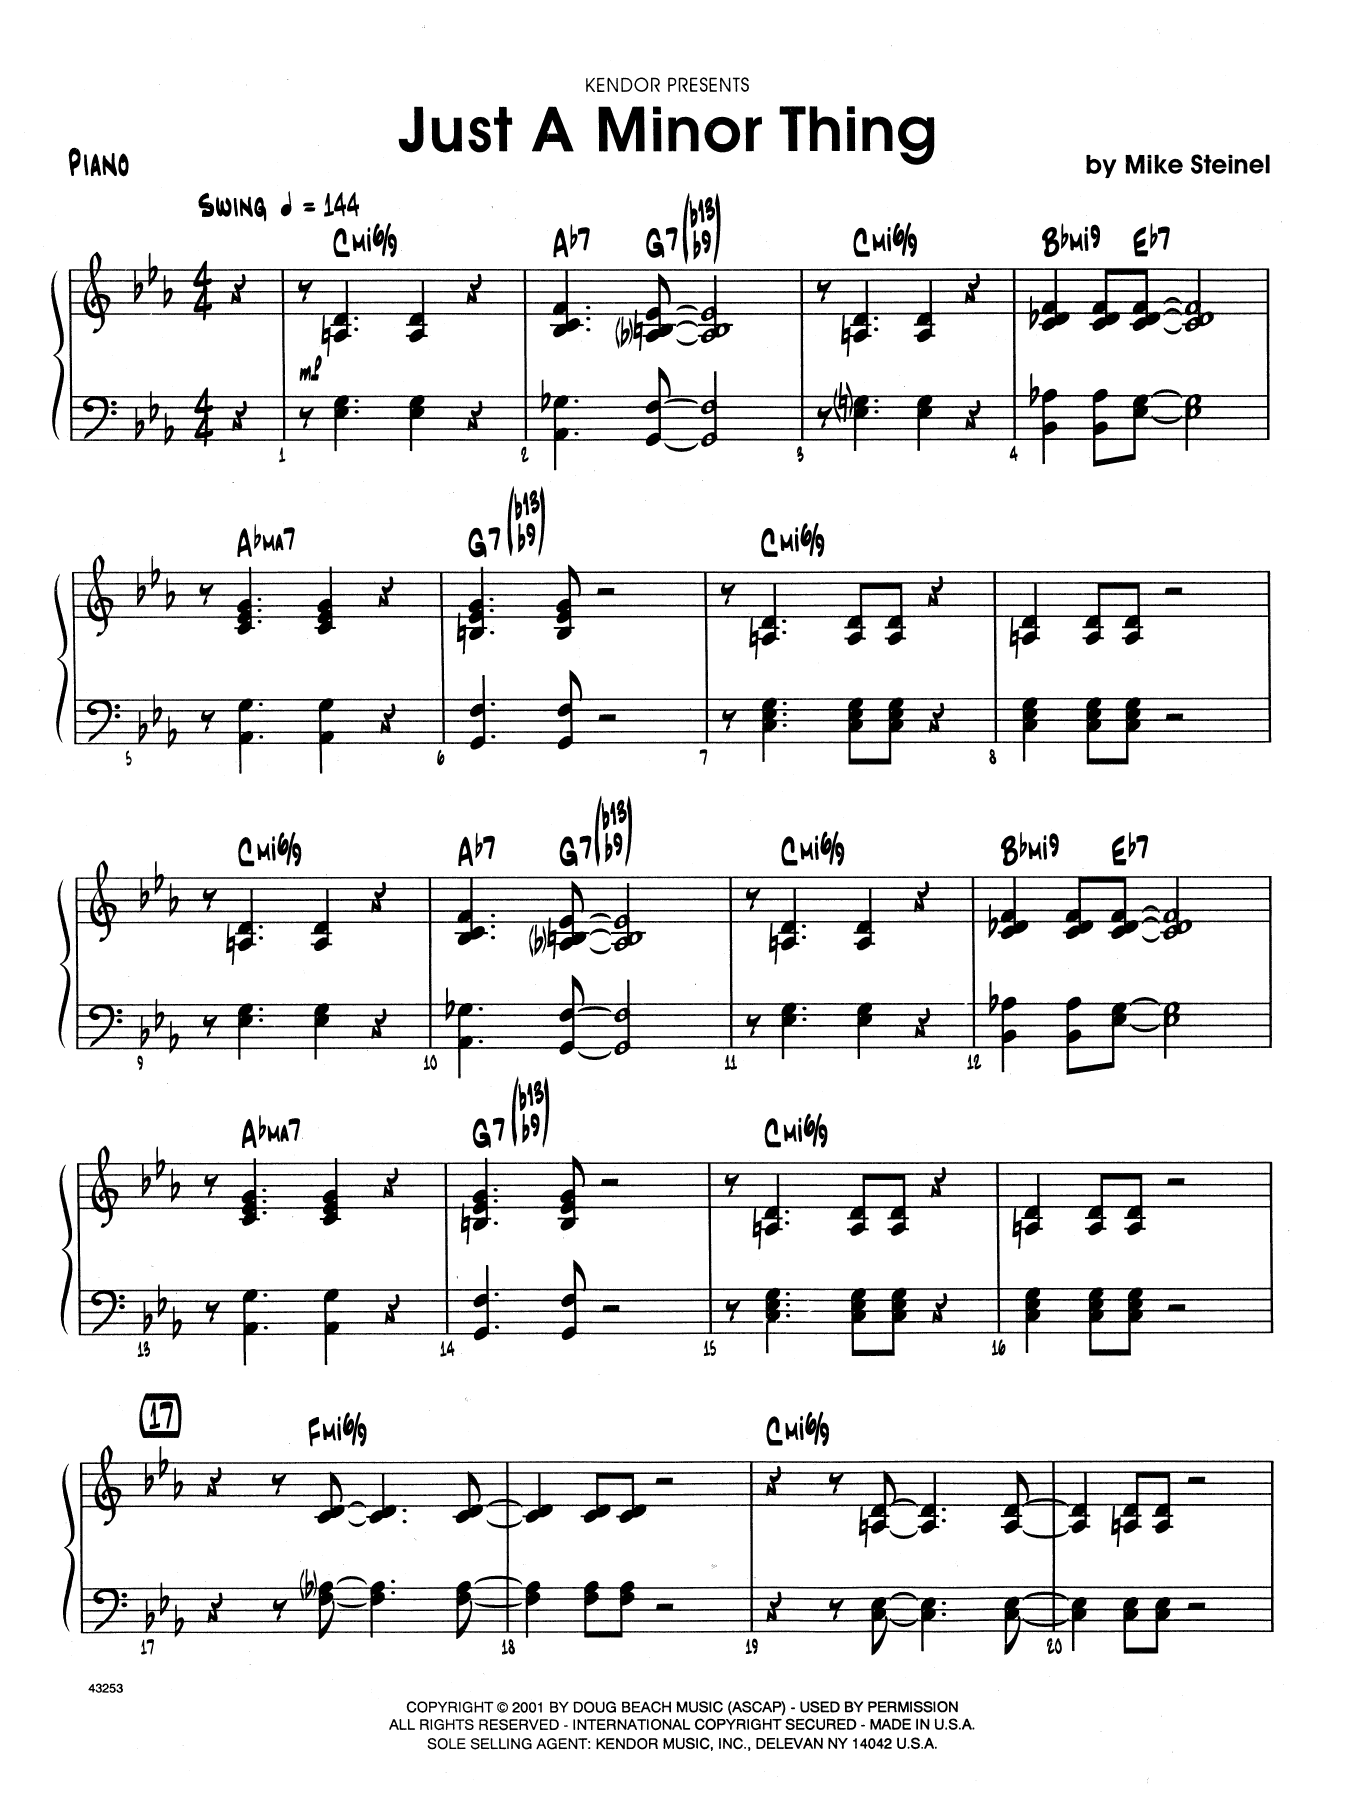 Download Mike Steinel Just A Minor Thing - Piano Sheet Music